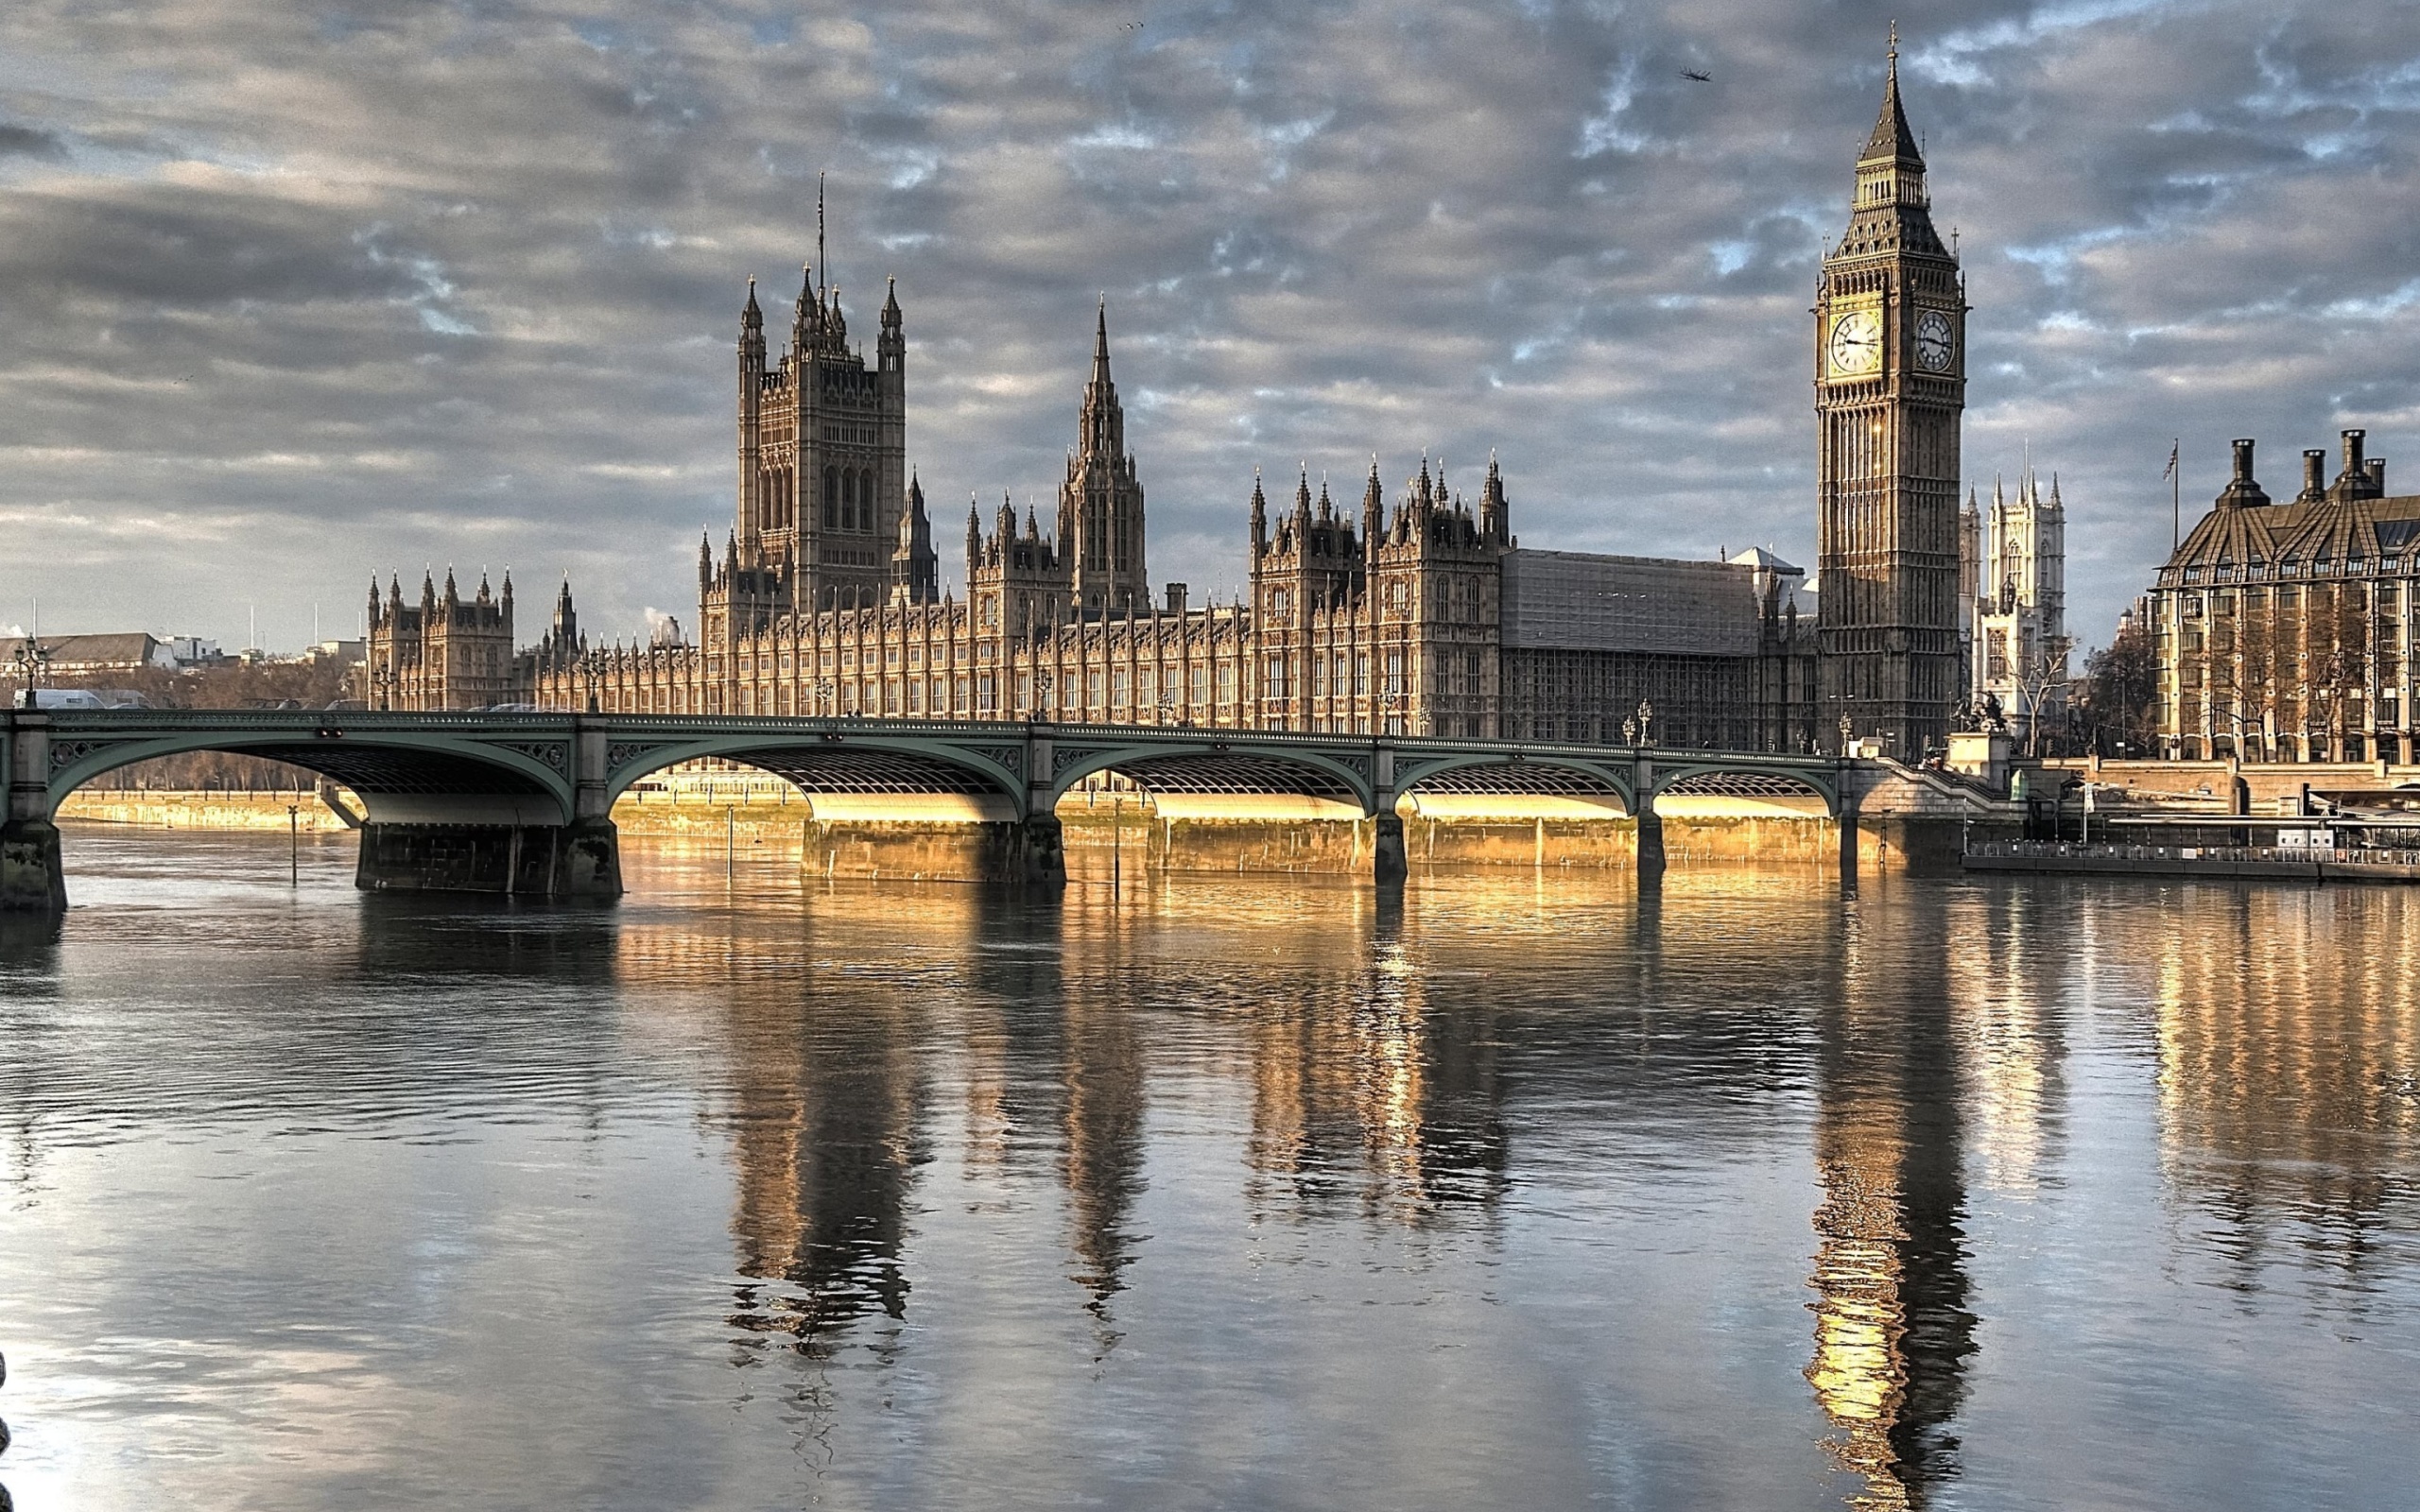 Palace of Westminster in London screenshot #1 2560x1600